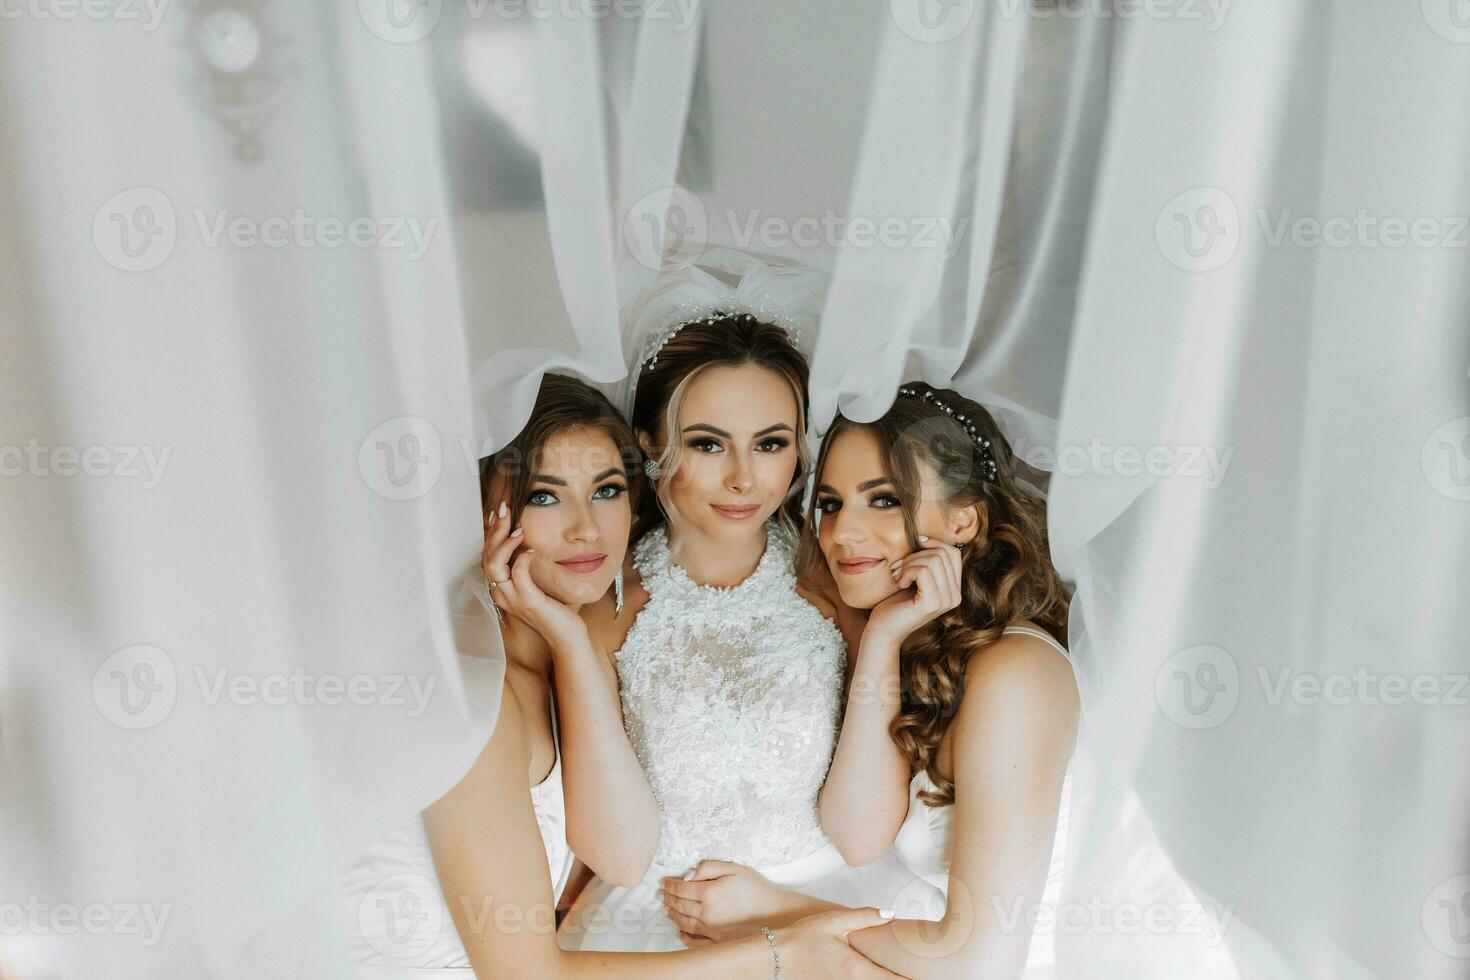 The bridesmaids are looking at the camera. All under the bride's veil. The bride and her fun friends are celebrating a bachelorette party in matching dresses. Bride and friends in the room photo